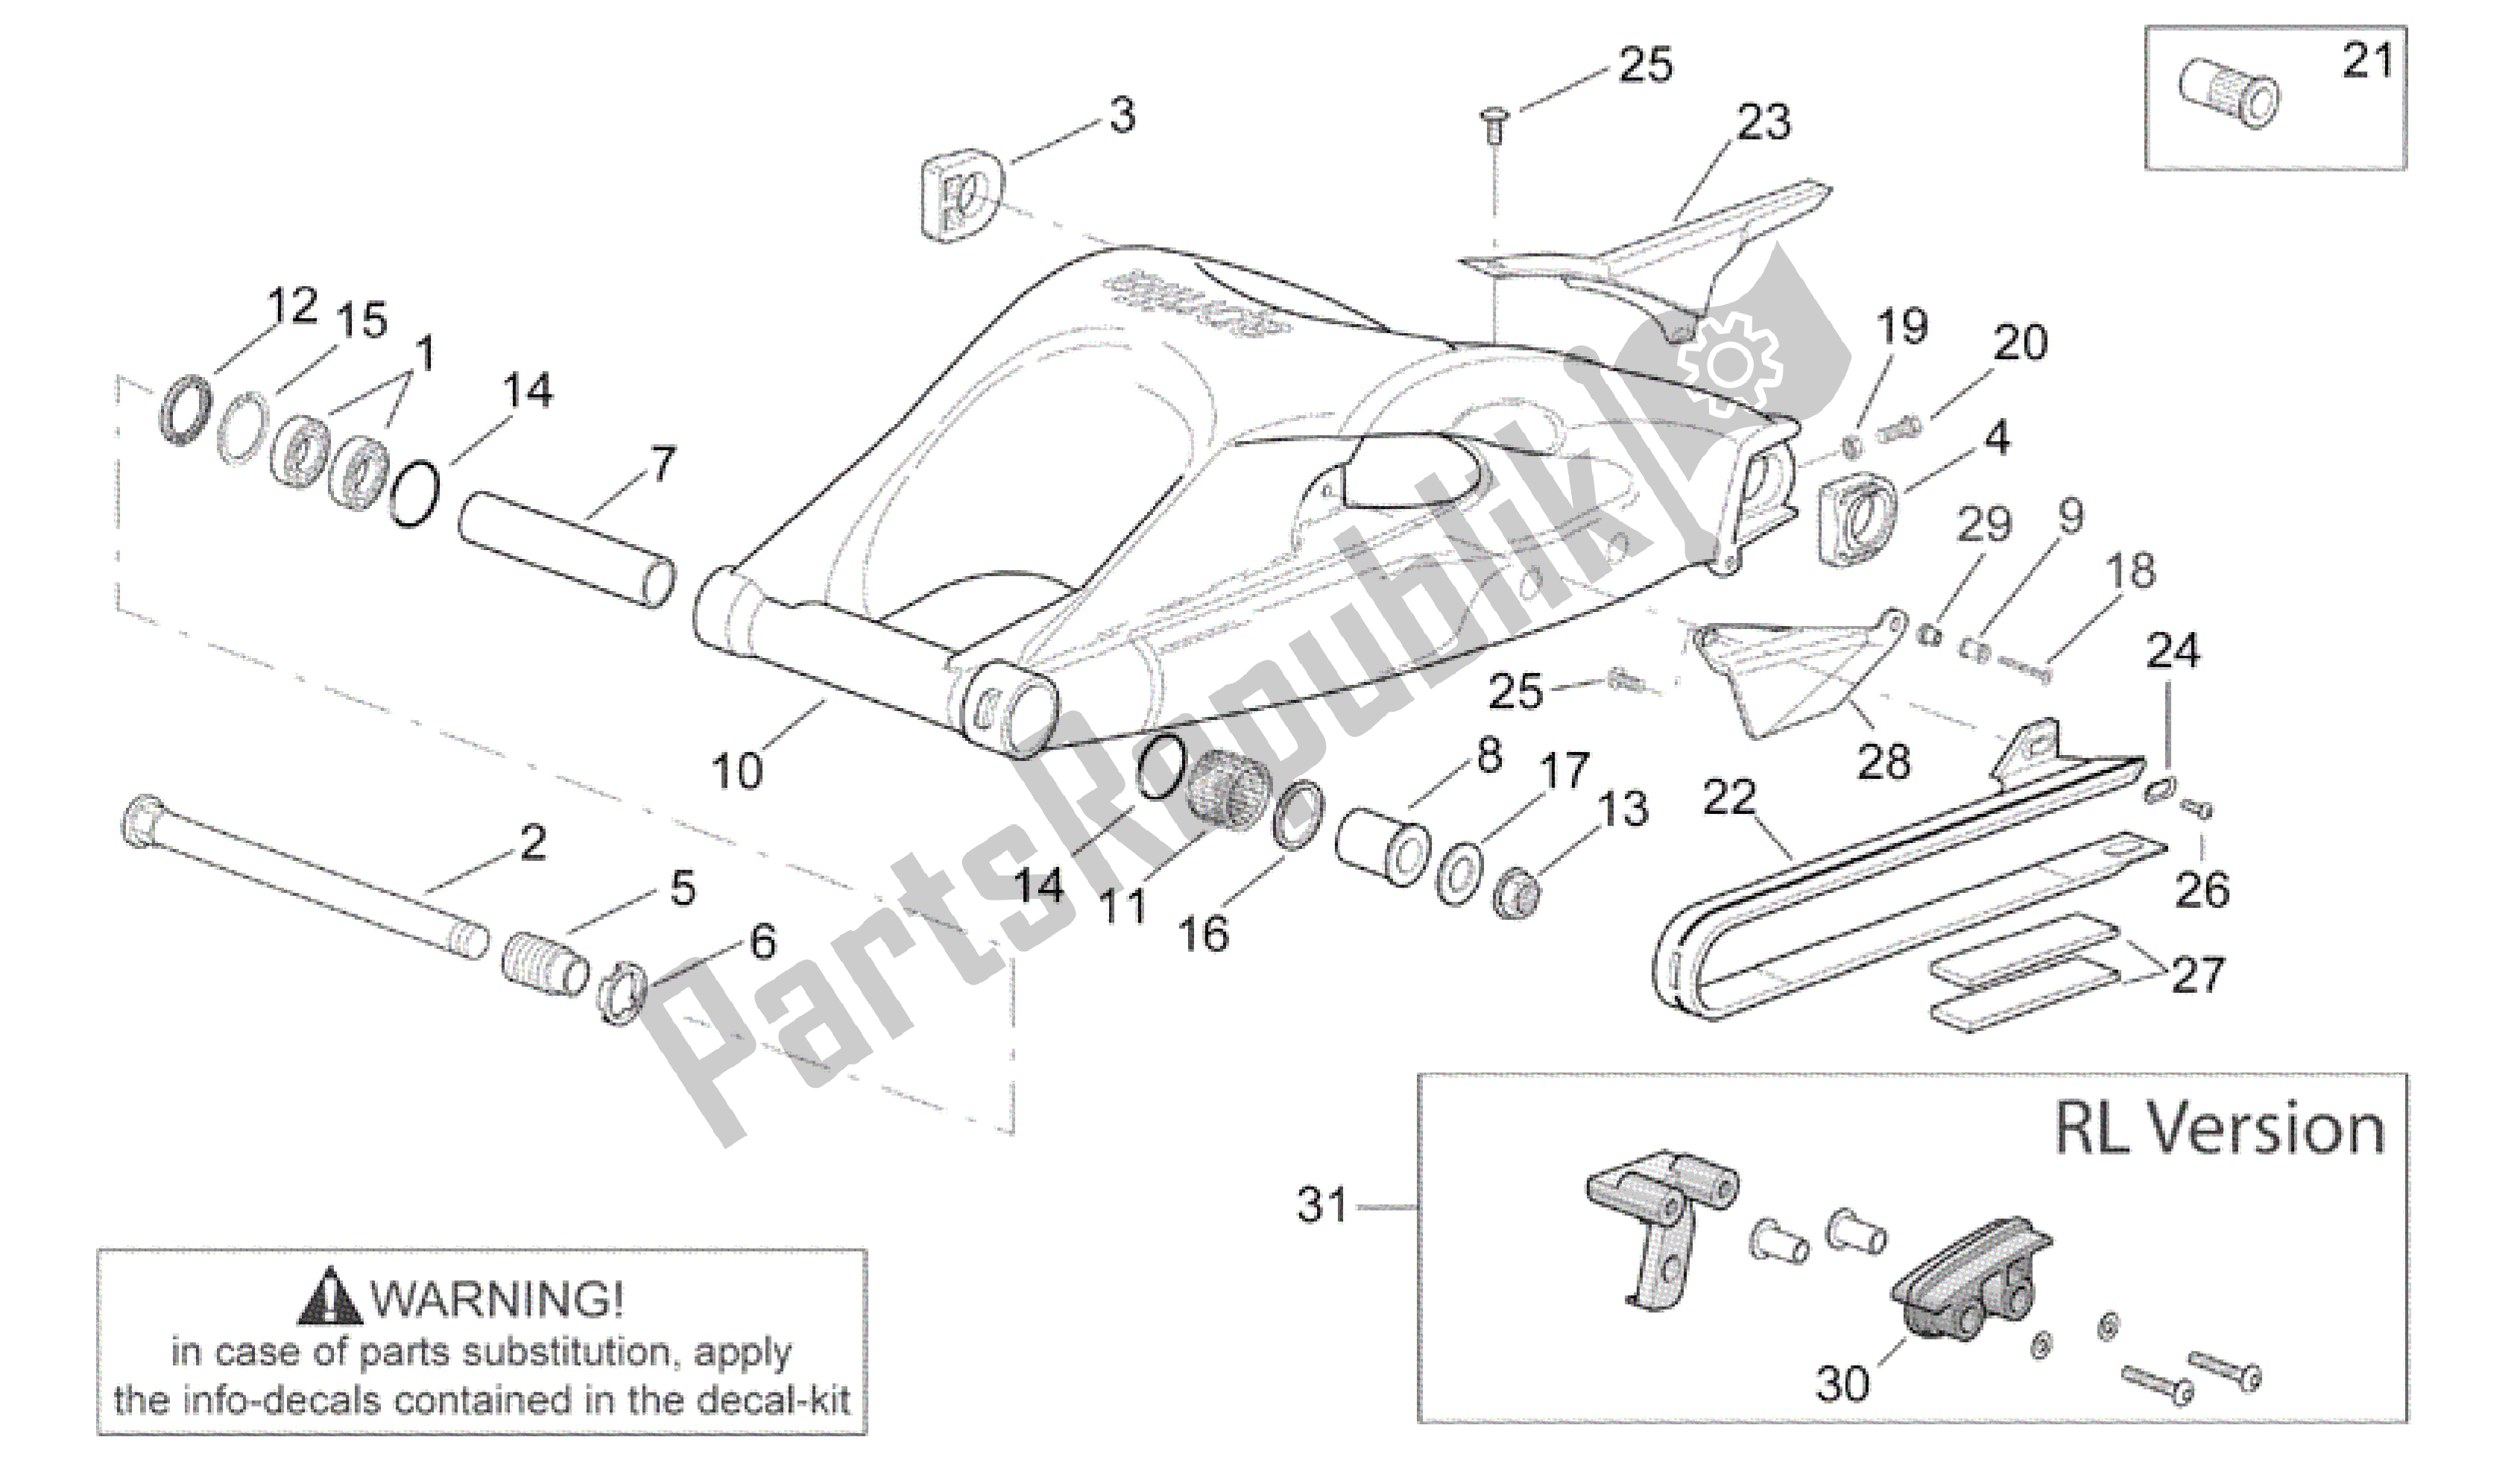 All parts for the Swing Arm of the Aprilia RSV Mille R GP1 Limited Edition 3963 1000 2003